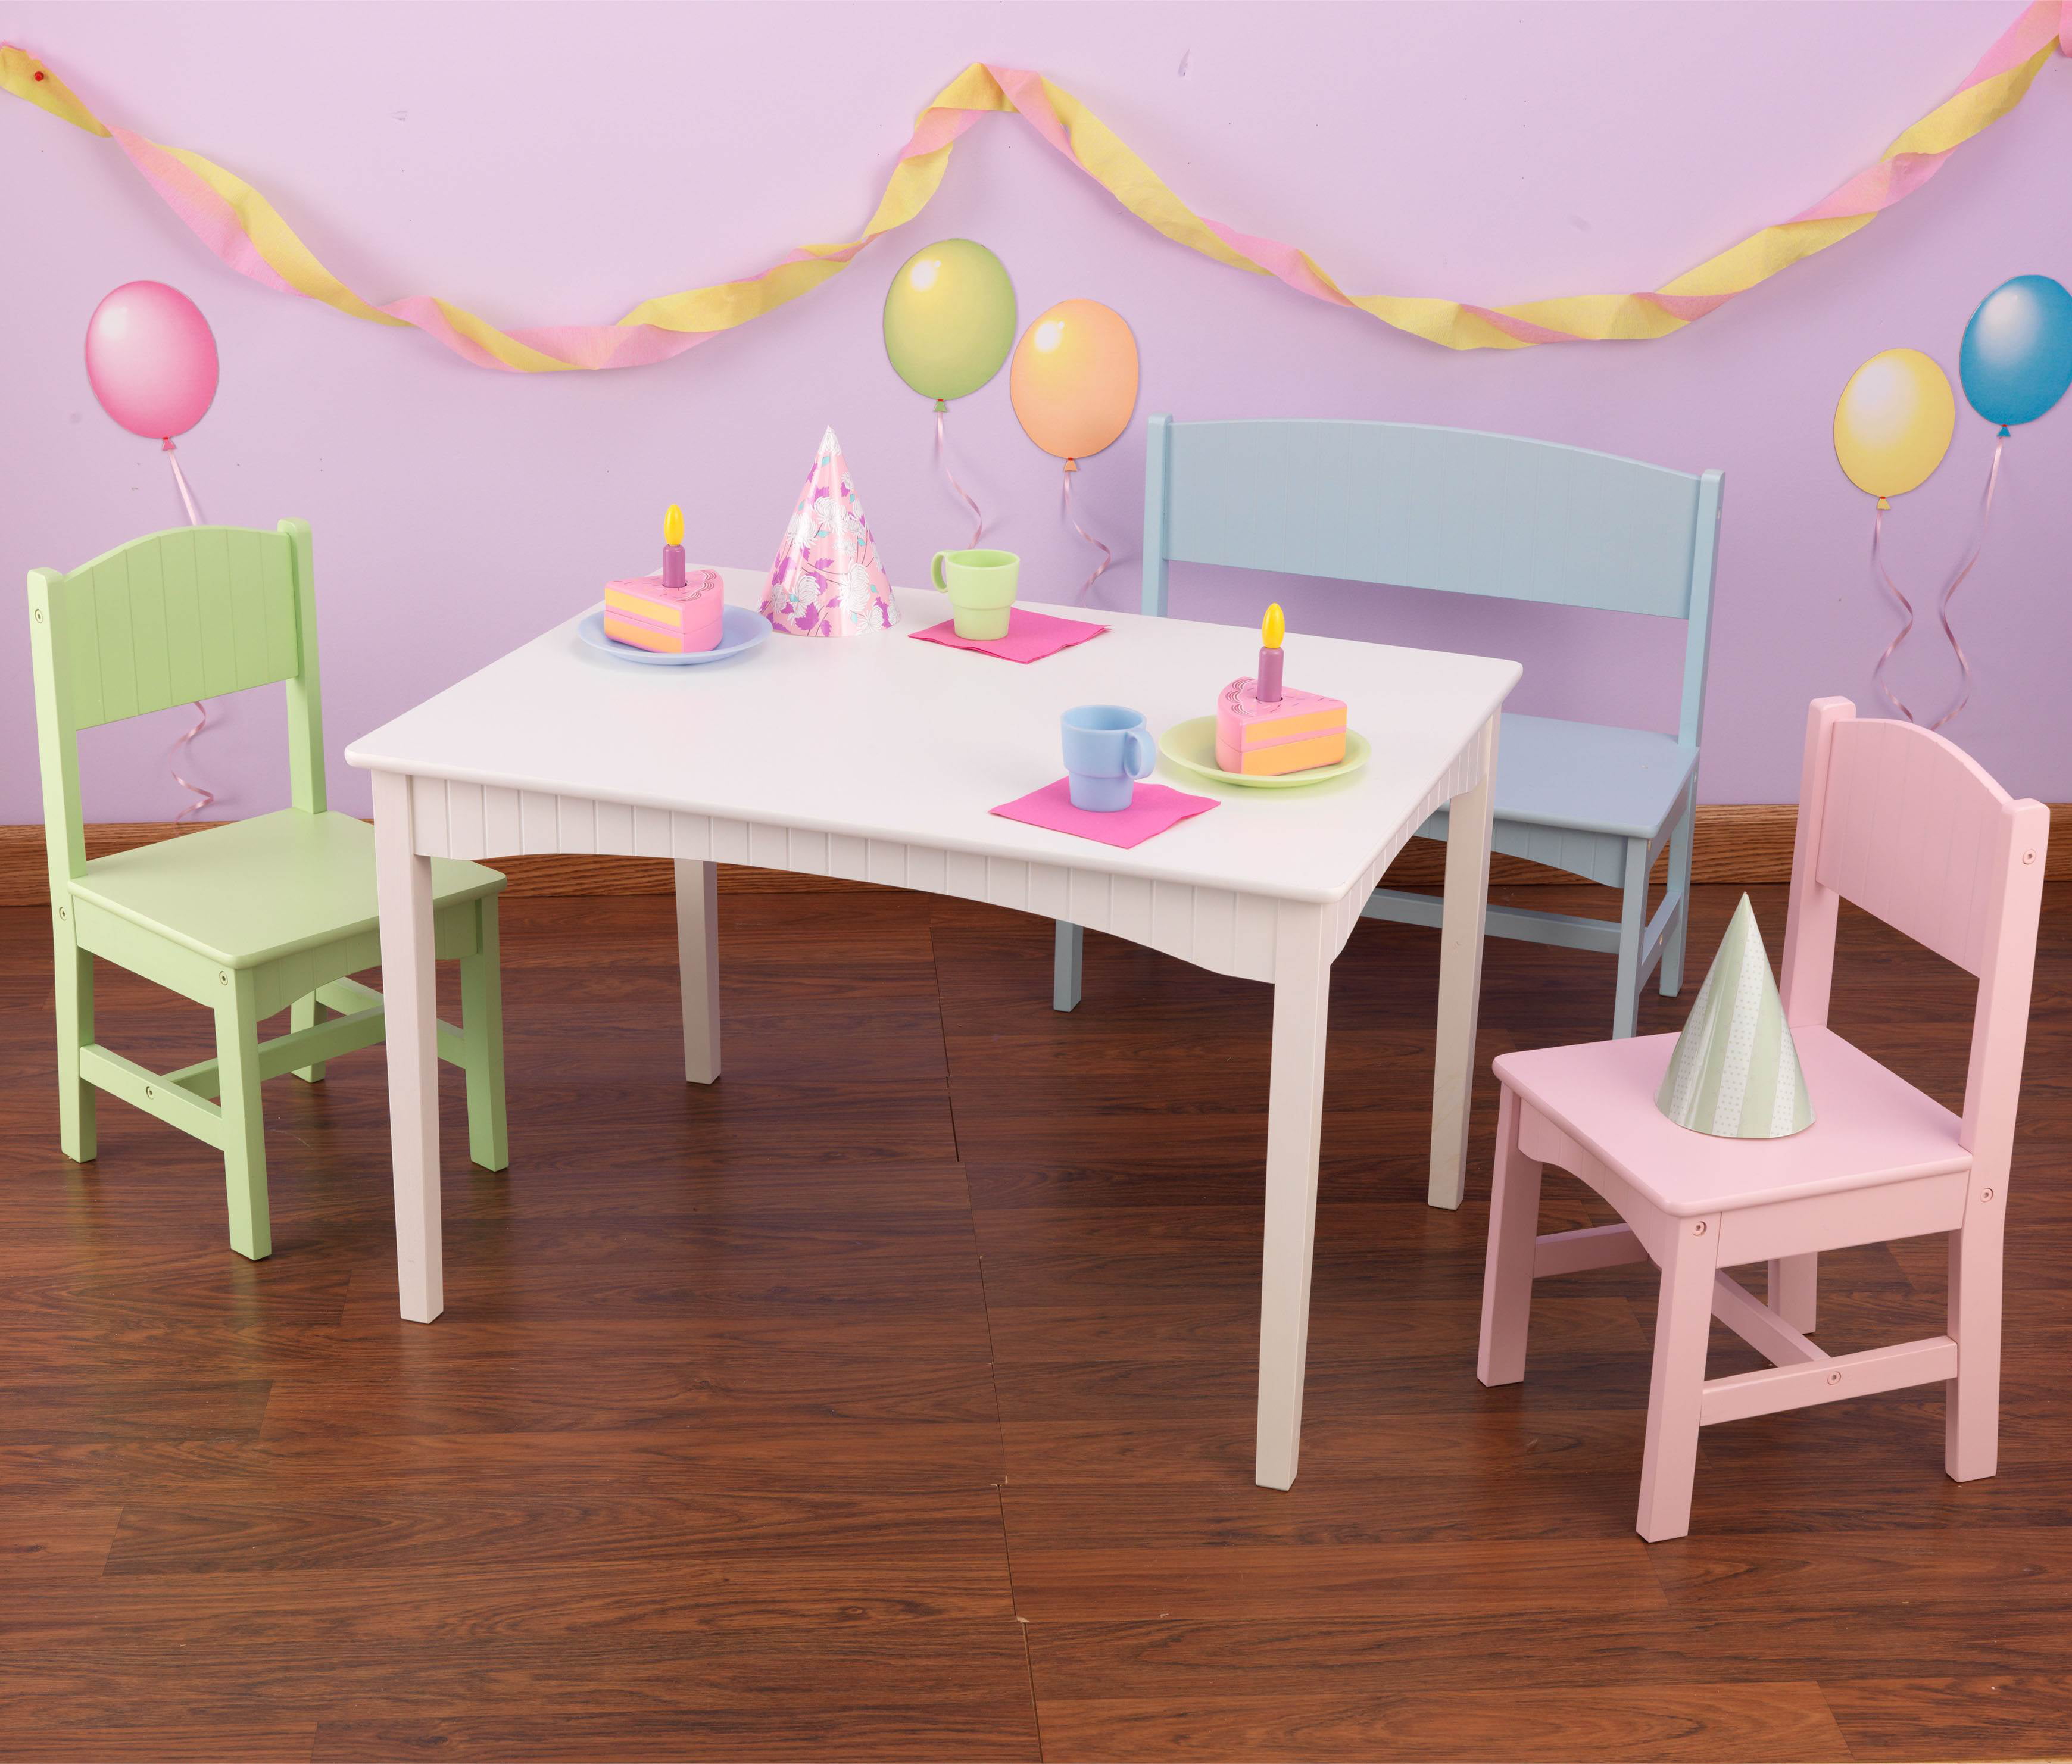 KidKraft Nantucket Kids Table with Bench and 2 Chairs Set - Pastel